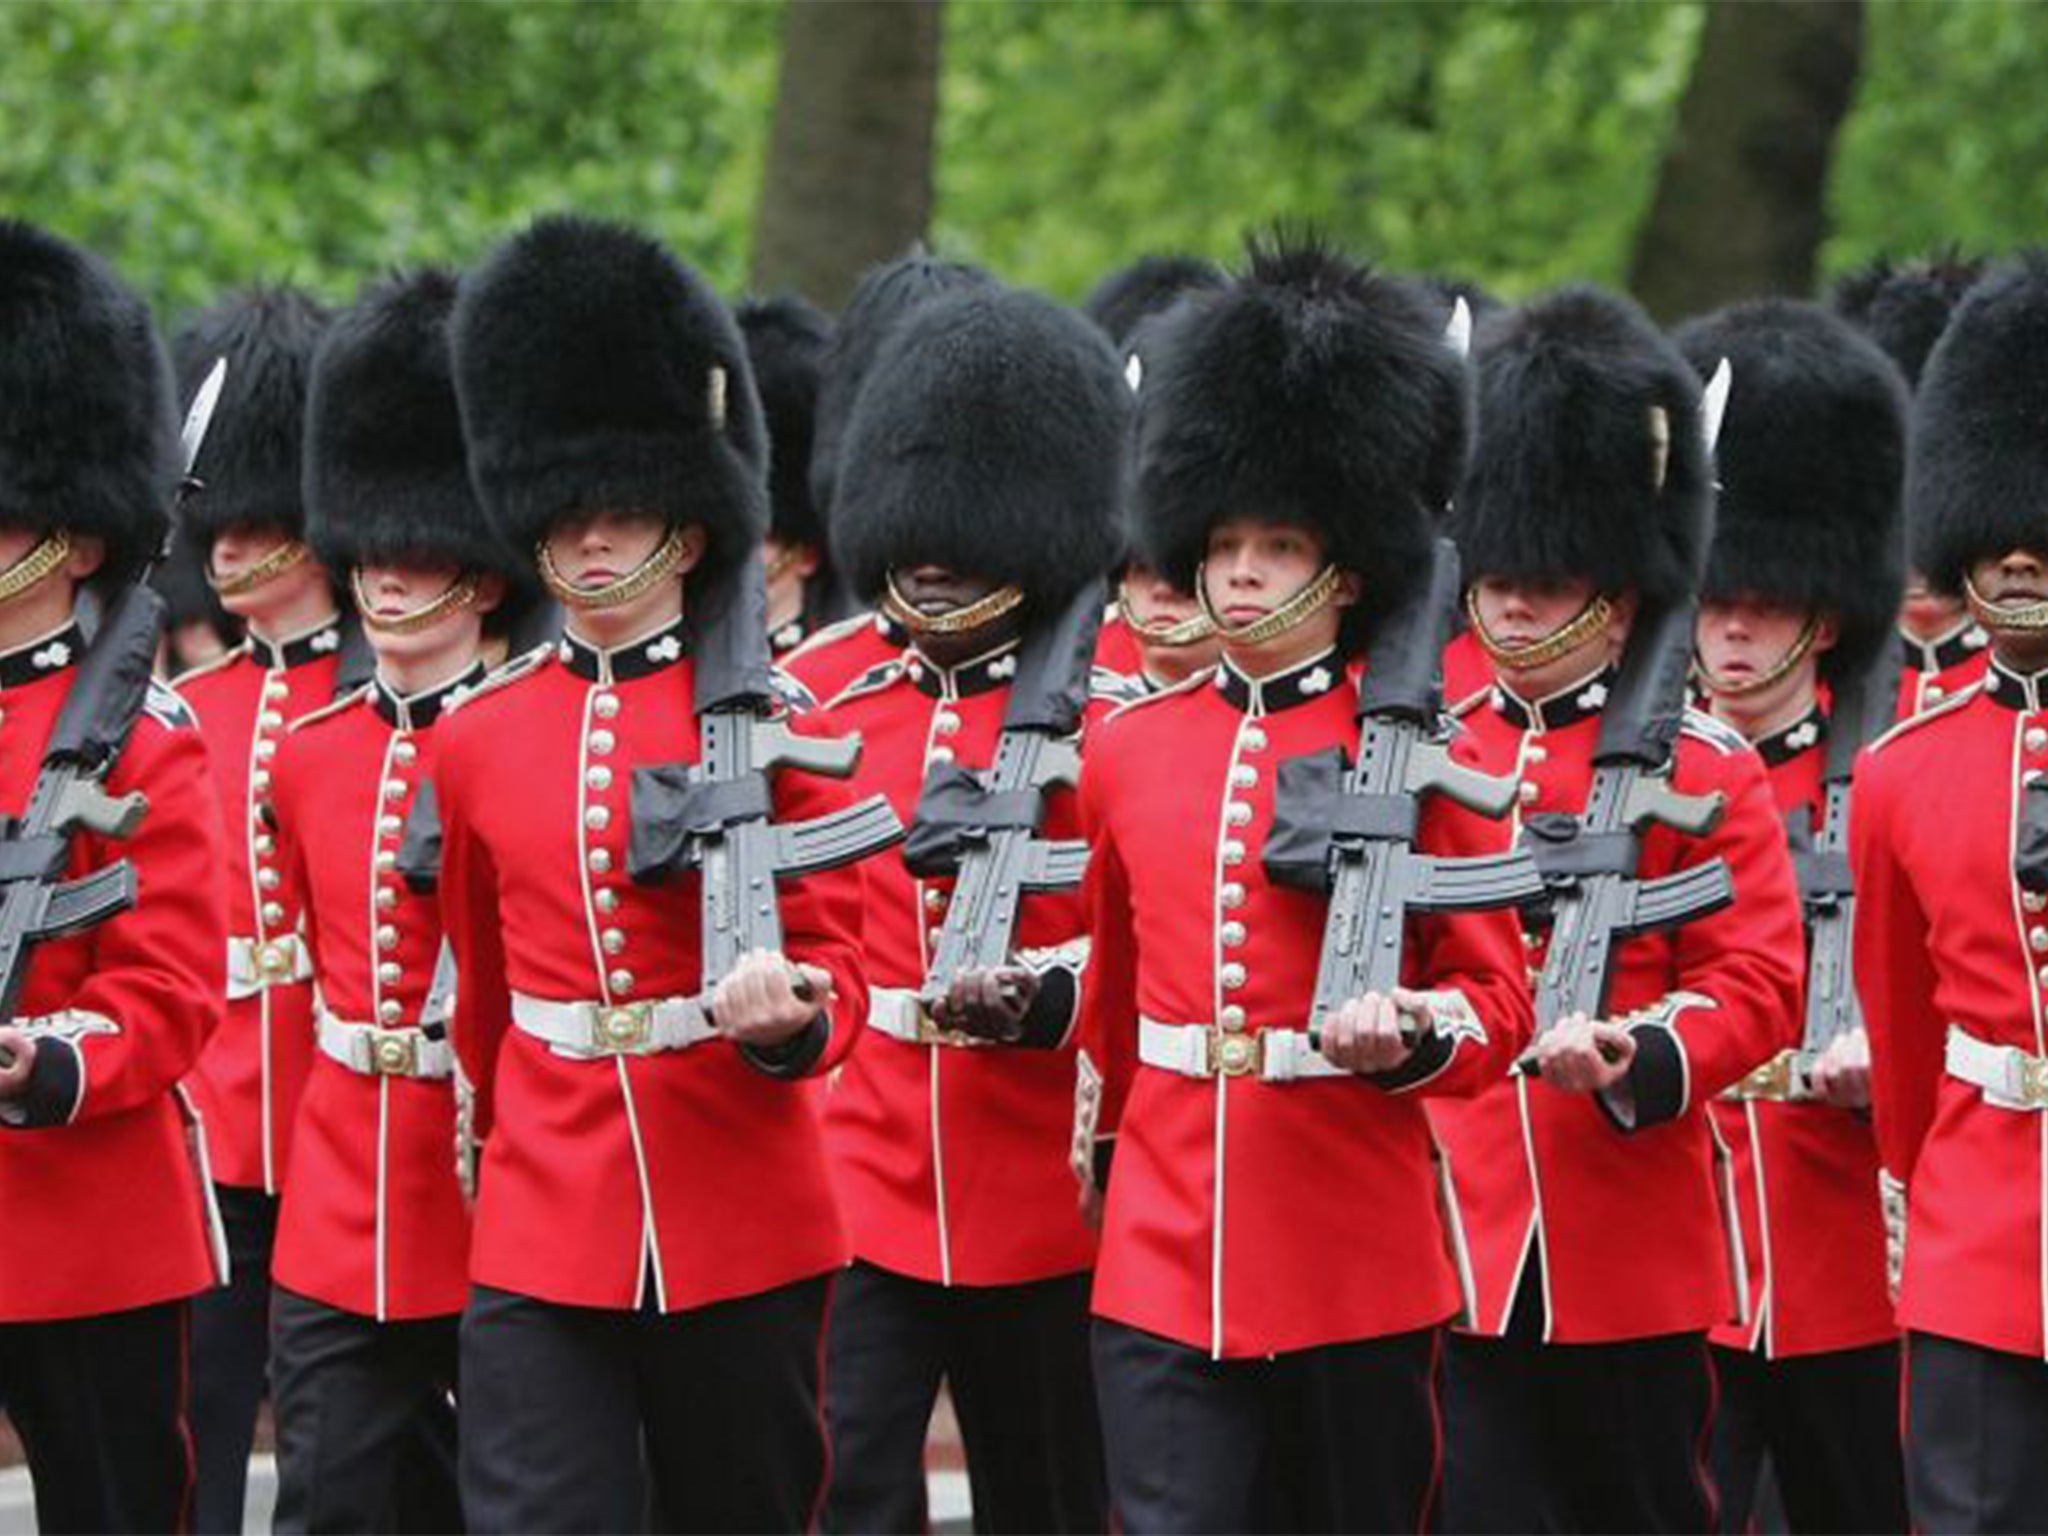 The Queen's Foot Guards march during training for the Trooping of the Colours ceremon